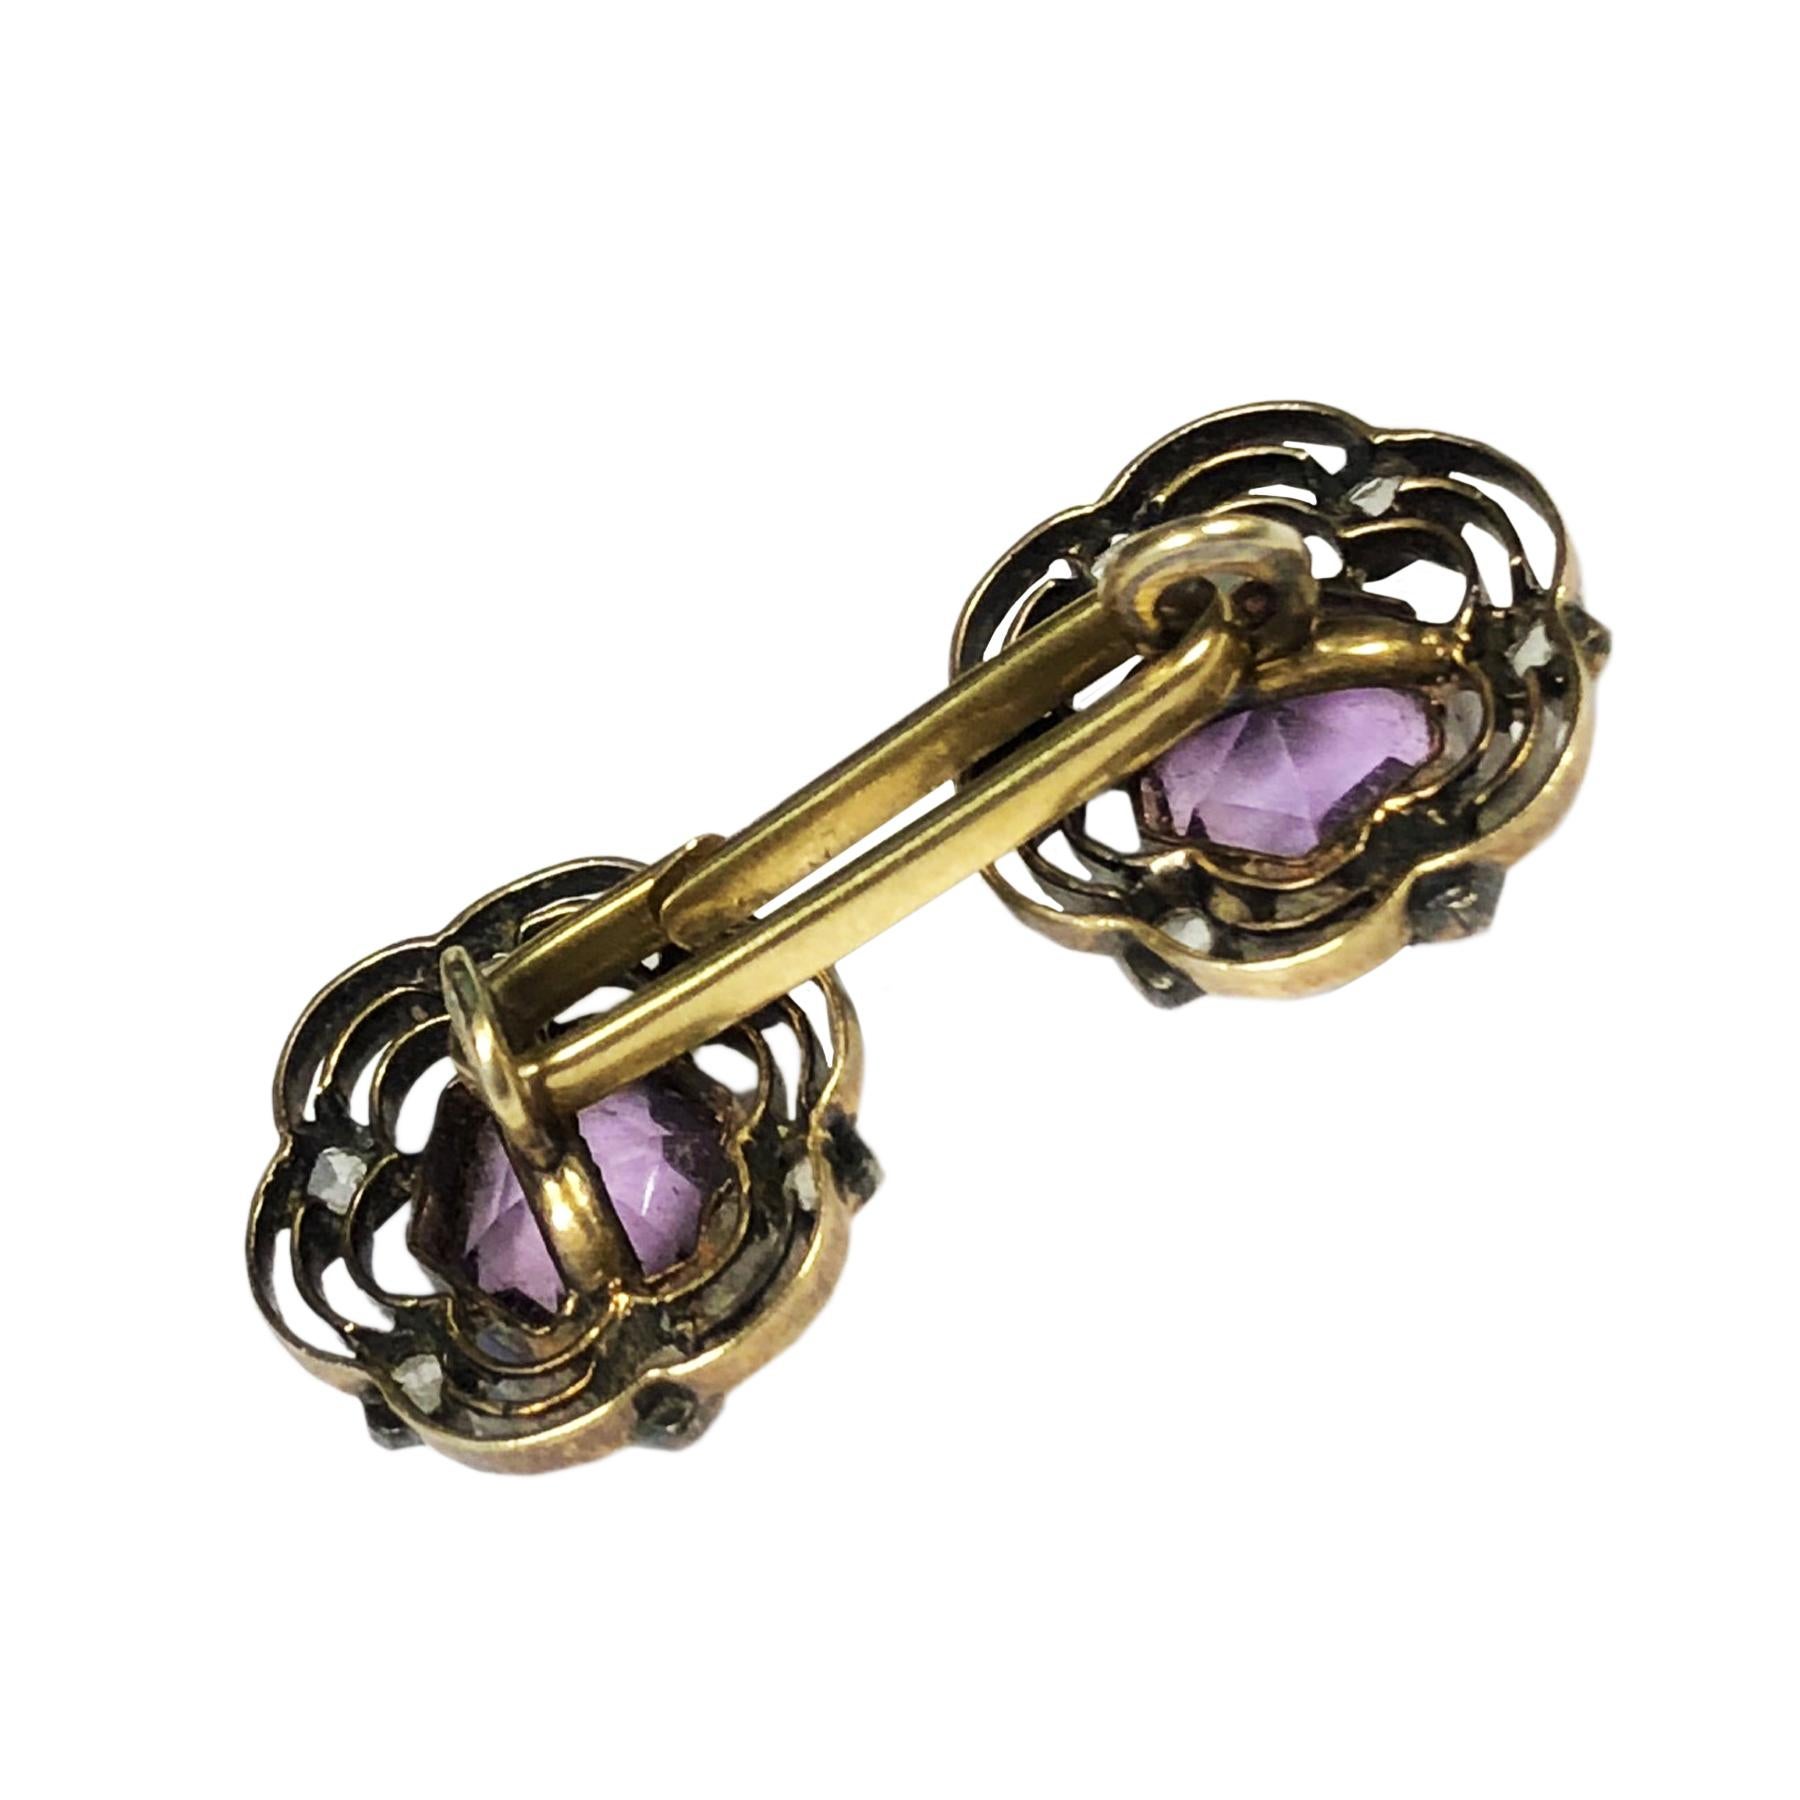 Circa 1910 14K  Yellow Gold Cufflinks, 2 sided with the tops of each measuring 1/2 inch in diameter. Centrally set with a Hexagon cut Amethyst and surrounded by Rose cut Diamonds. The center connecting bar has an opening that’s makes these easy to